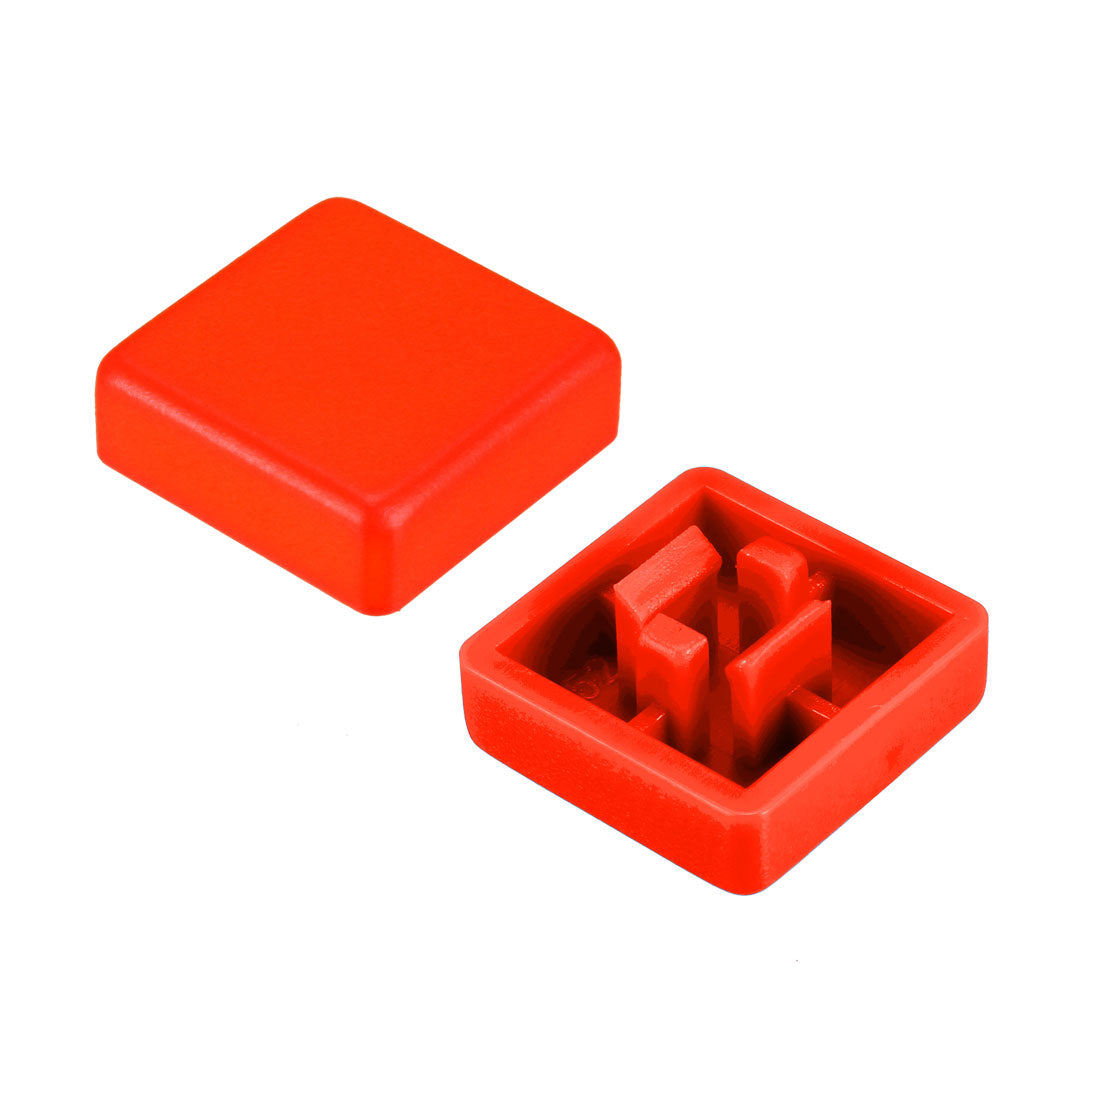 uxcell Uxcell 20Pcs Plastic 12x12mm Pushbutton Tactile Switch Caps Cover Keycaps Red for 12x12x7.3mm Tact Switch